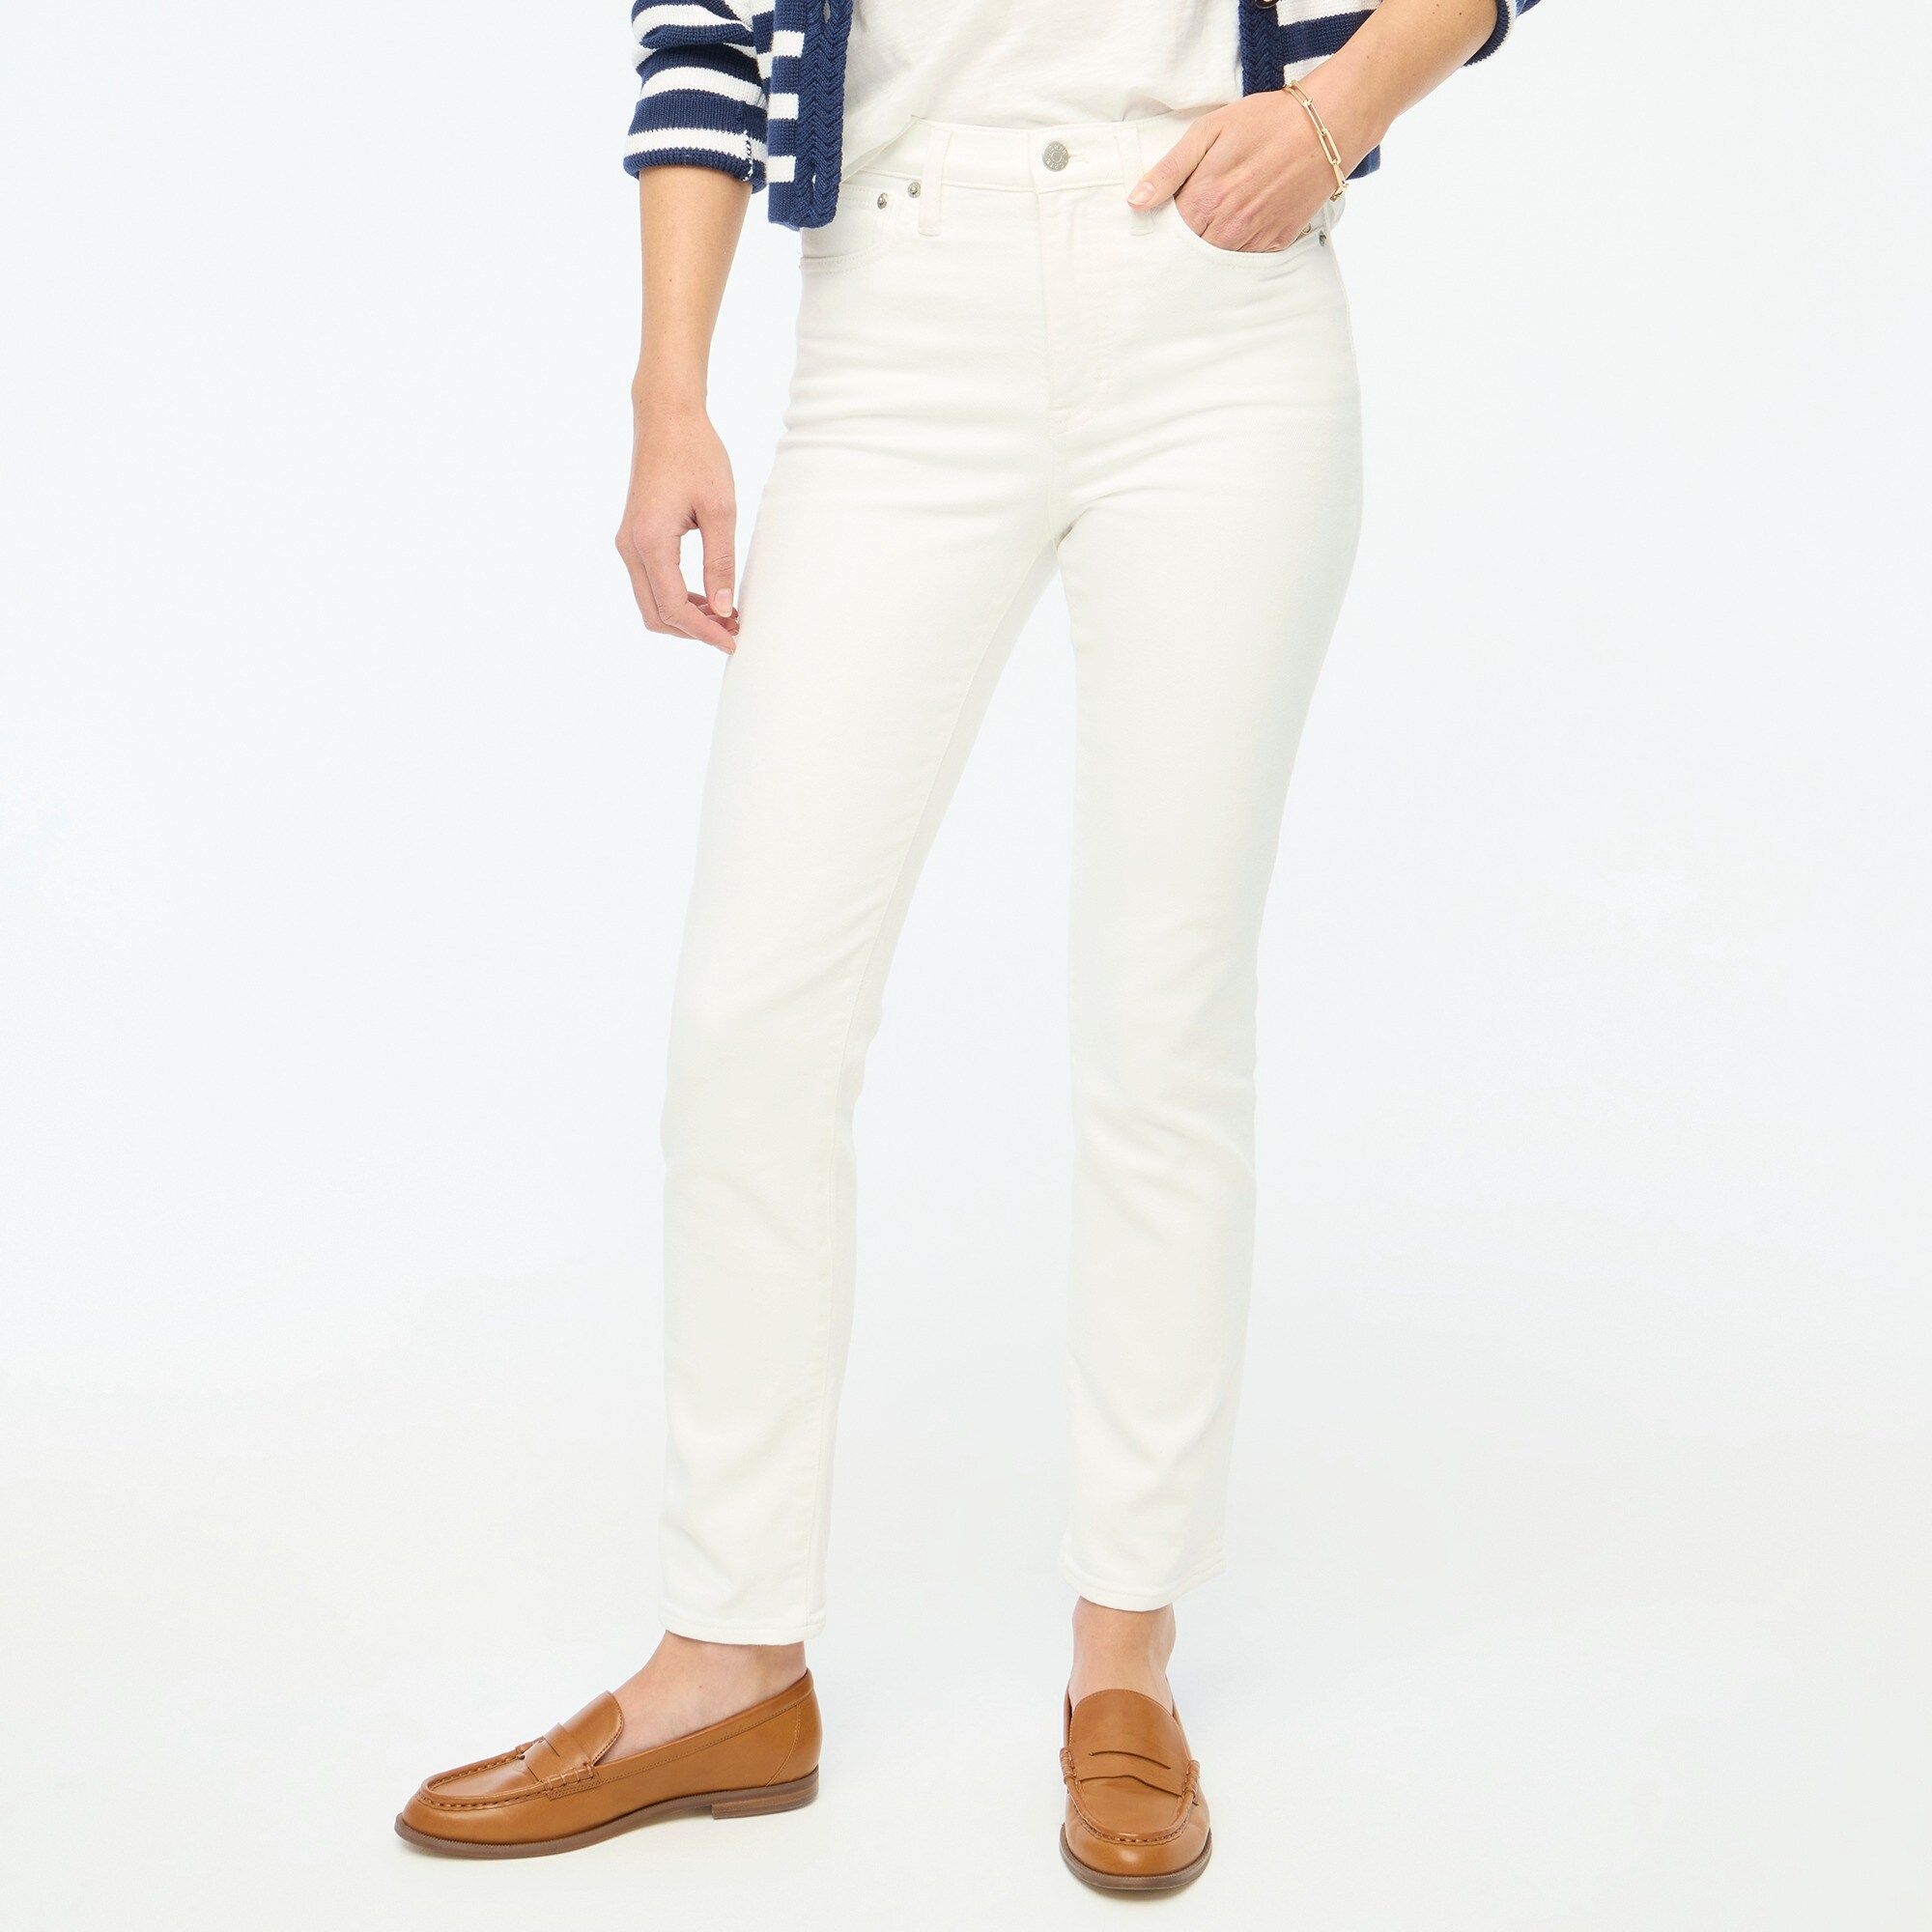  Essential straight white jean in all-day stretch